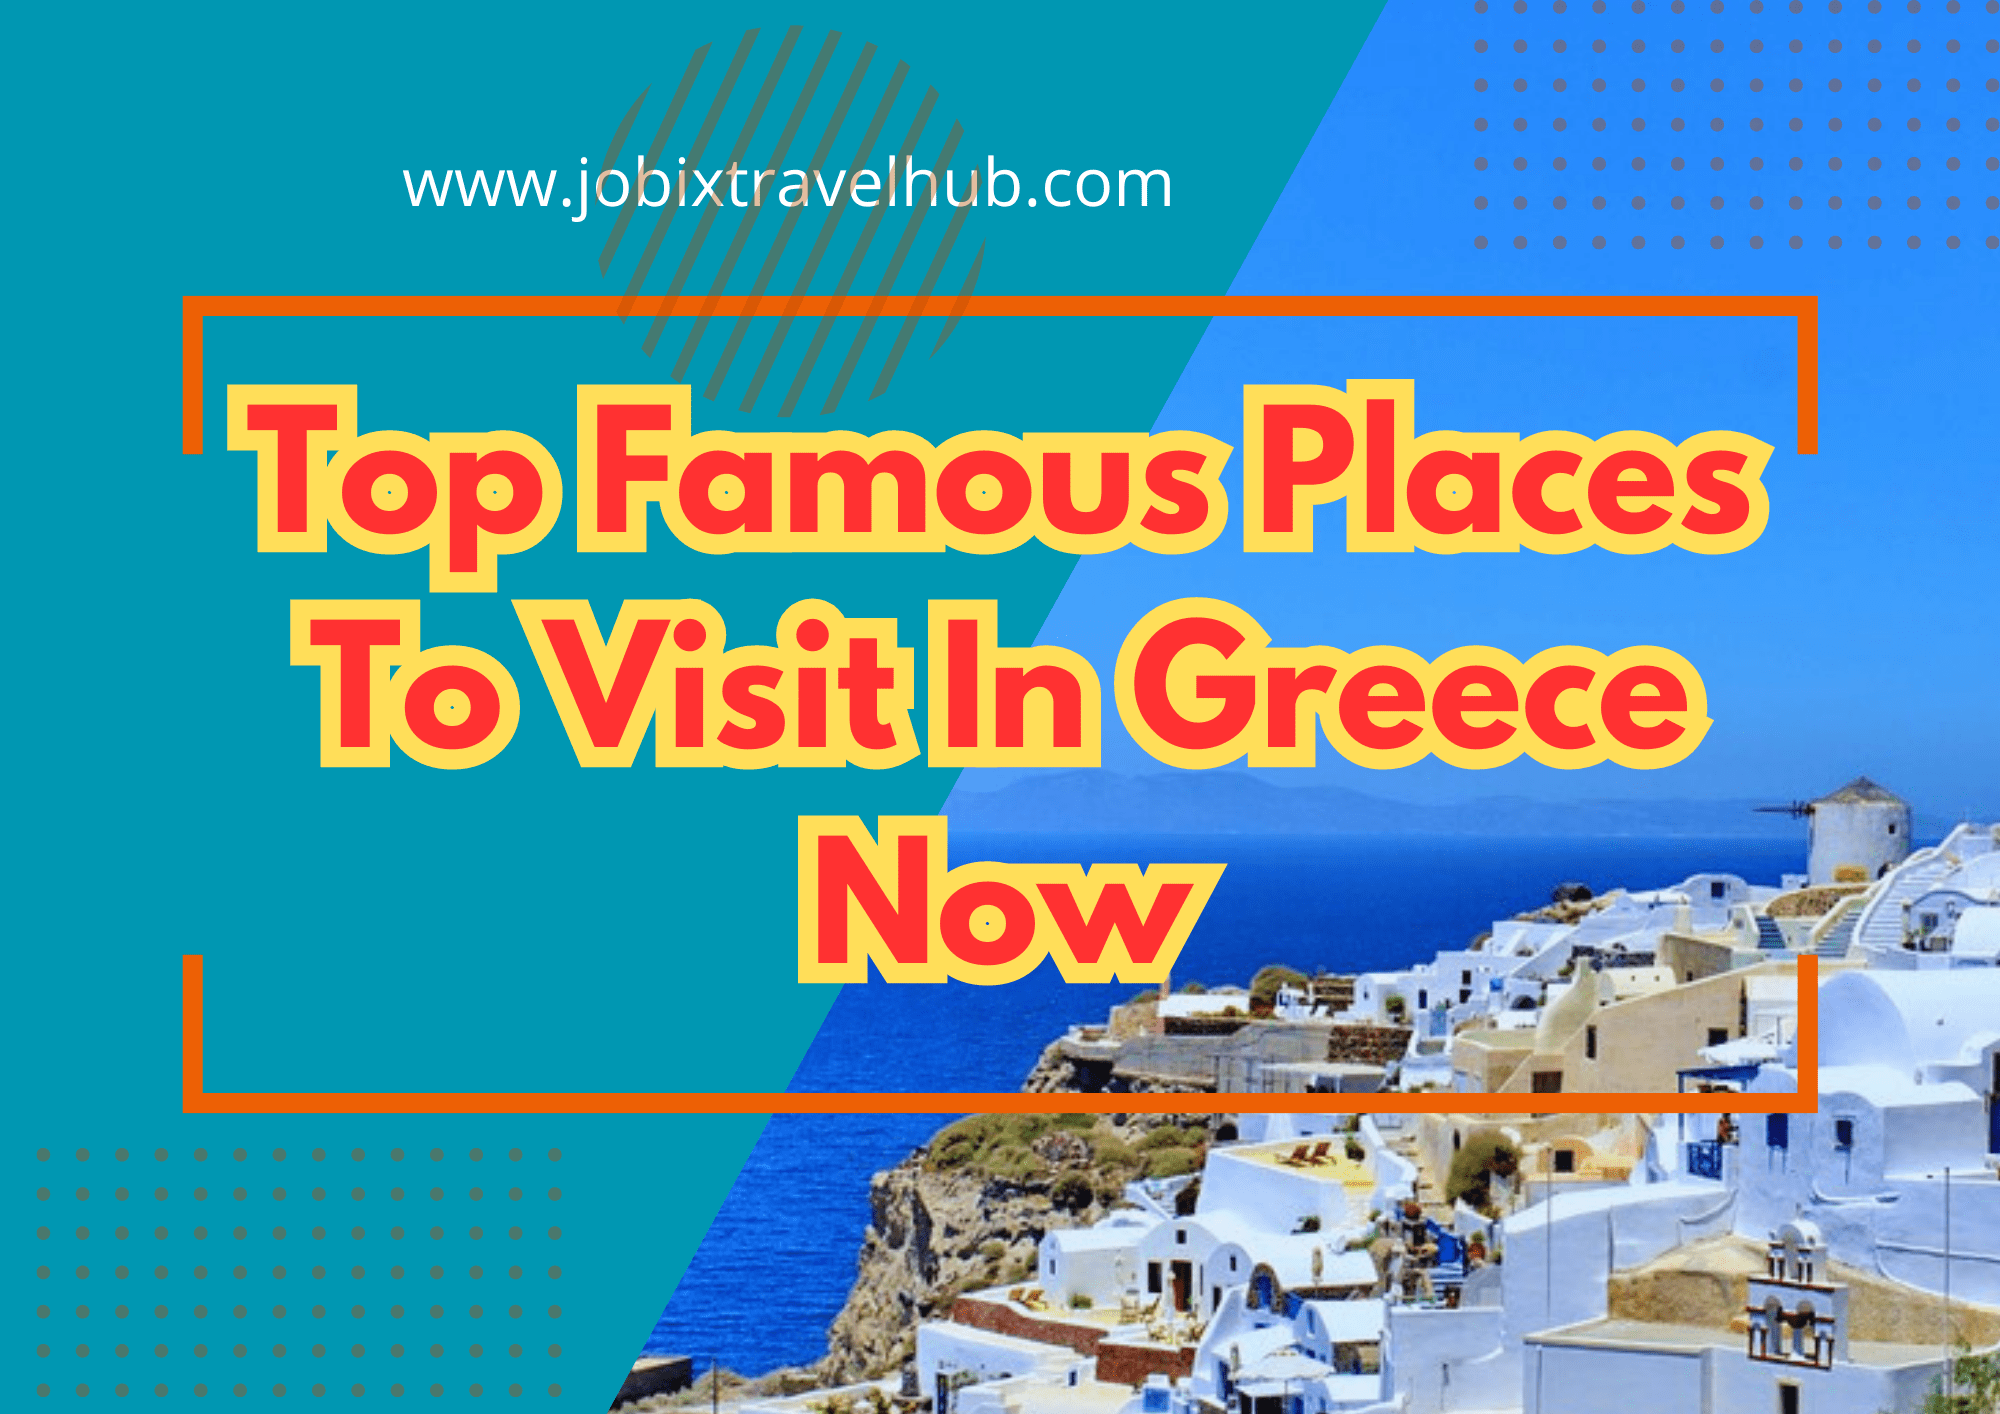 Top Famous Places To Visit In Greece Now